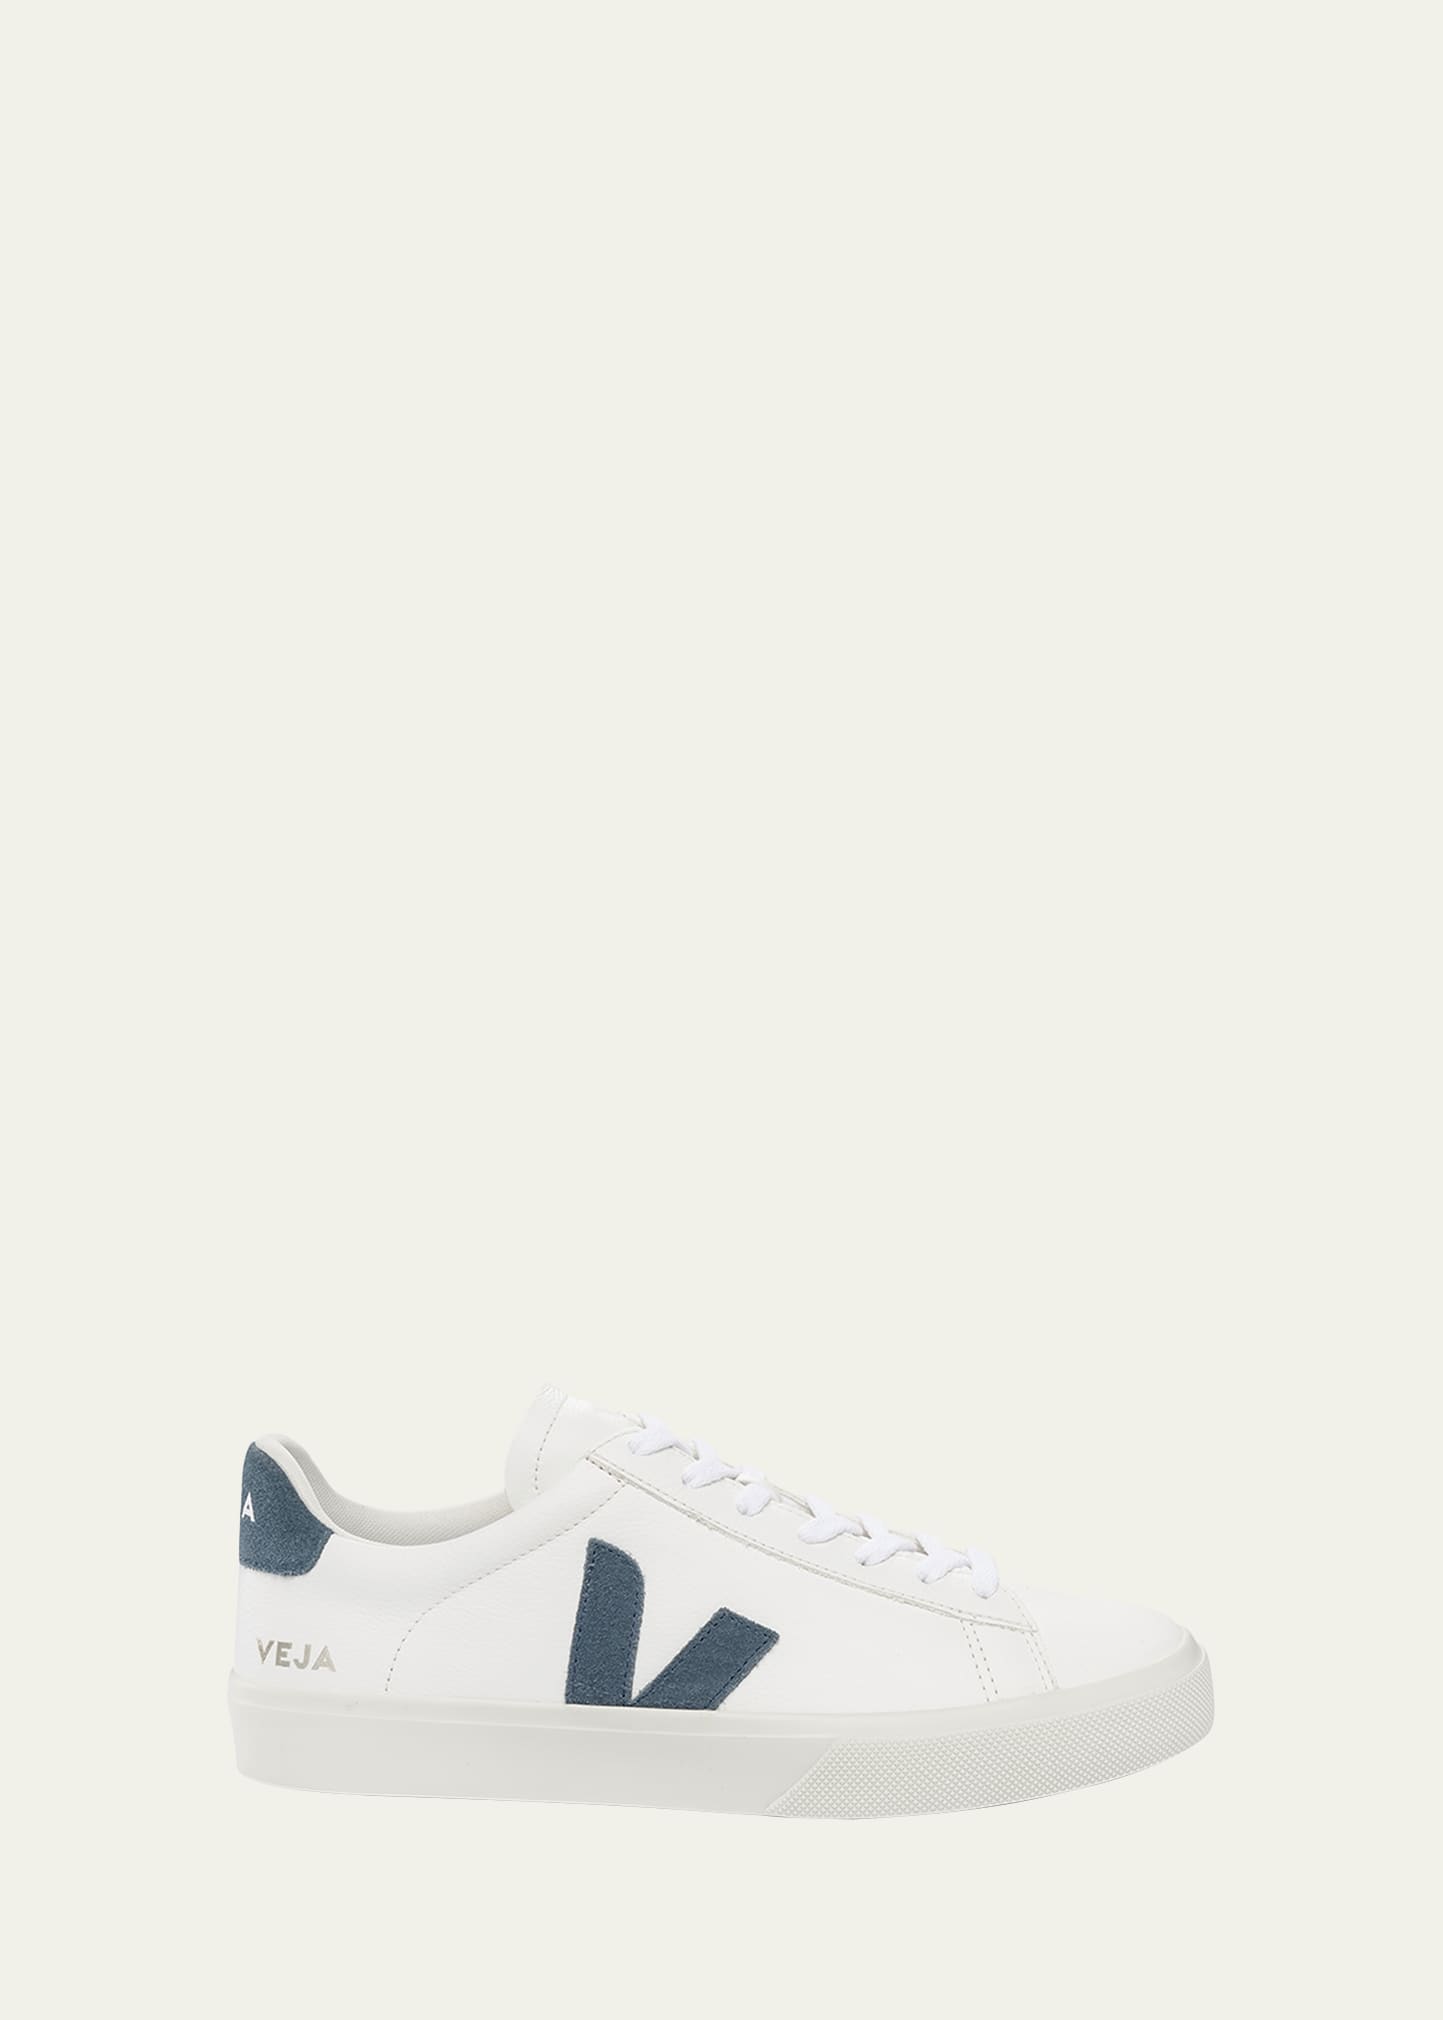 Veja Men's Campo Bicolor Leather Low-top Sneakers In Extra White Black